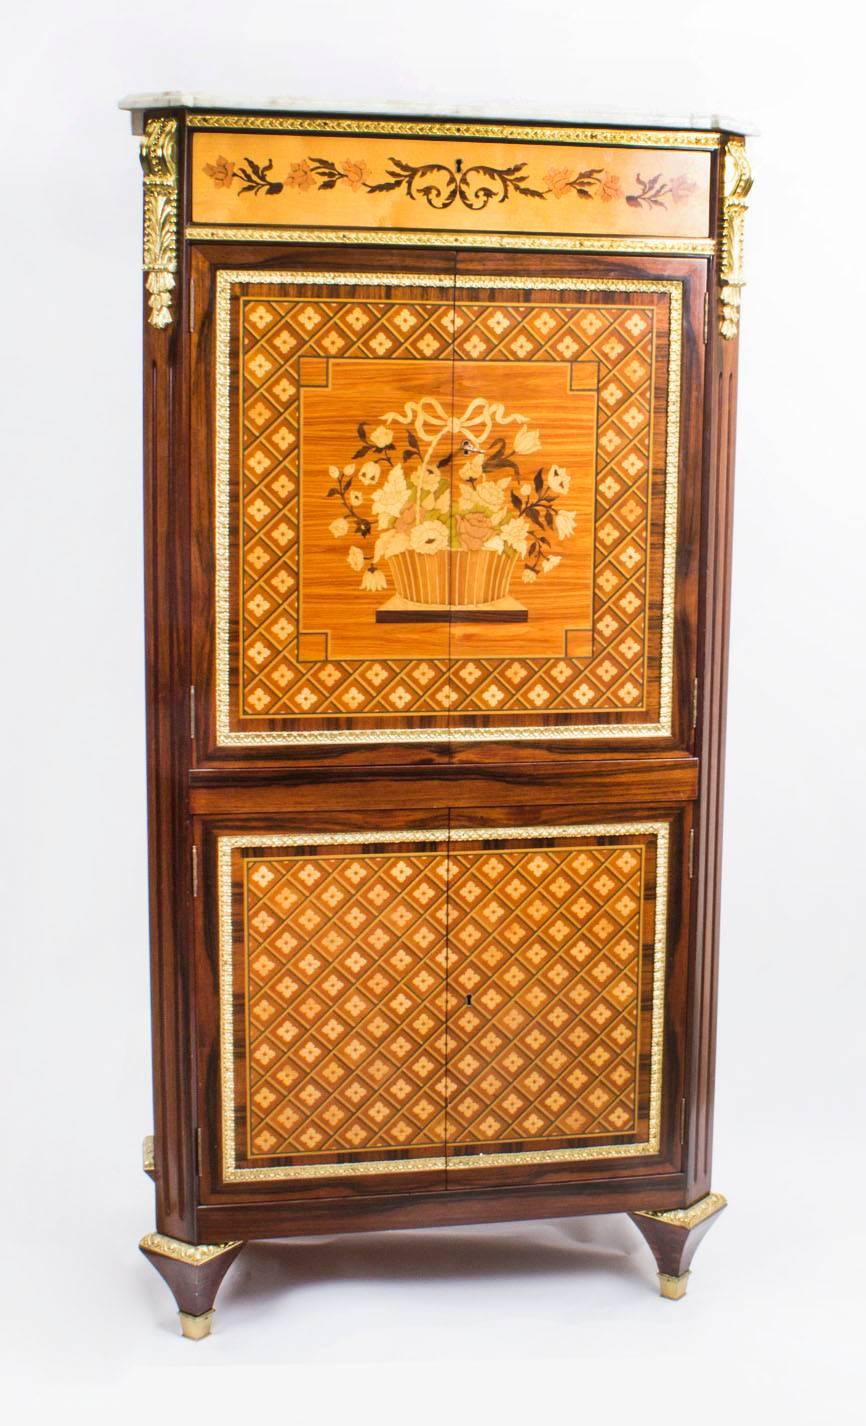 This is a stunning Louis Revival ormolu-mounted parquetry and marquetry cocktail cabinet dating from the third quarter of of the 20th century and retailed by Meubles Francais.

Of rosewood with tulipwood, satin birch and mahogany, the pair of top